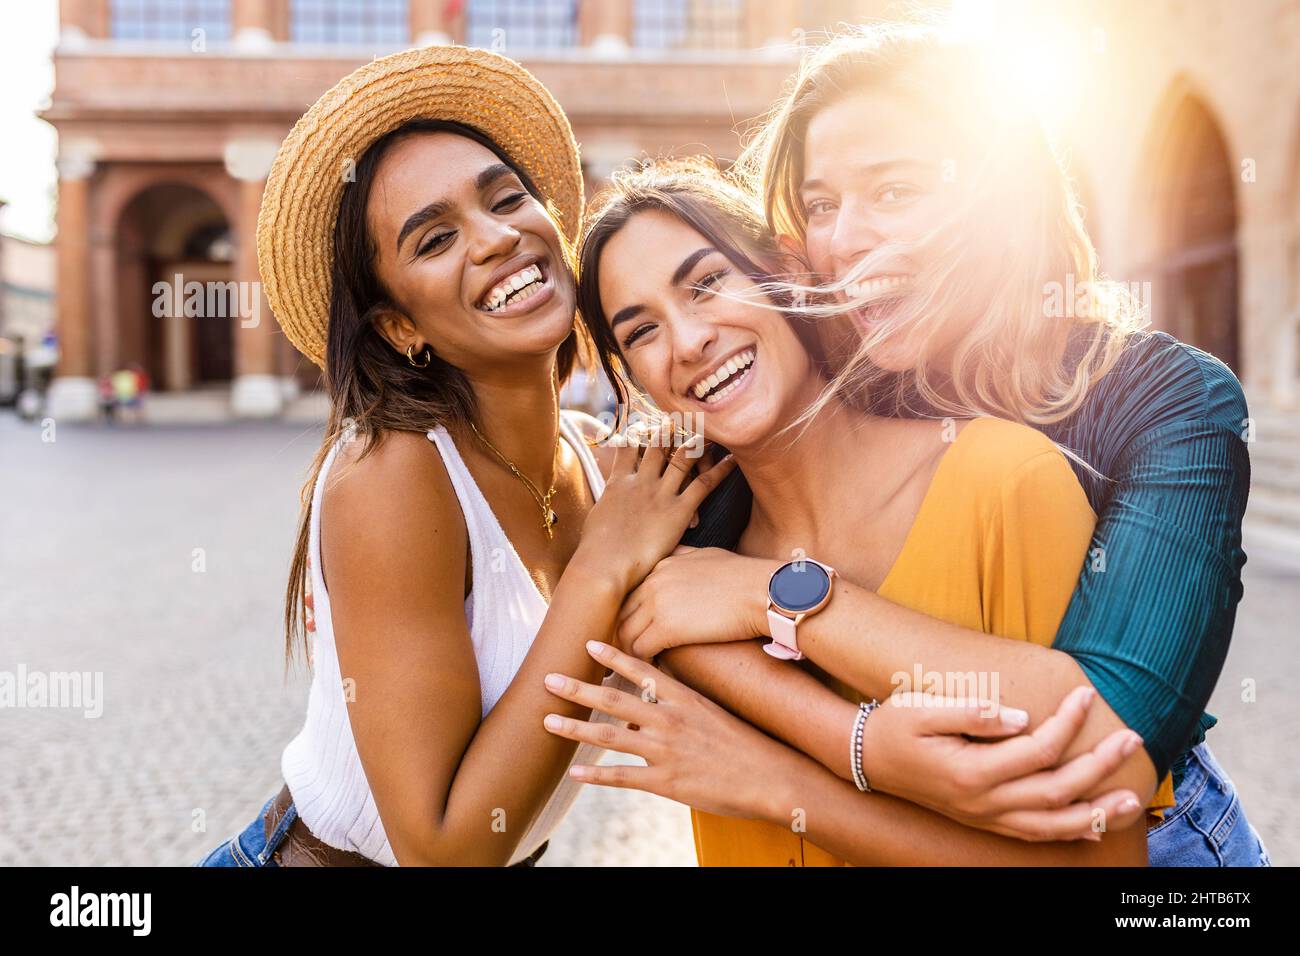 Happy group of beautiful young women laughing together outdoors Stock Photo